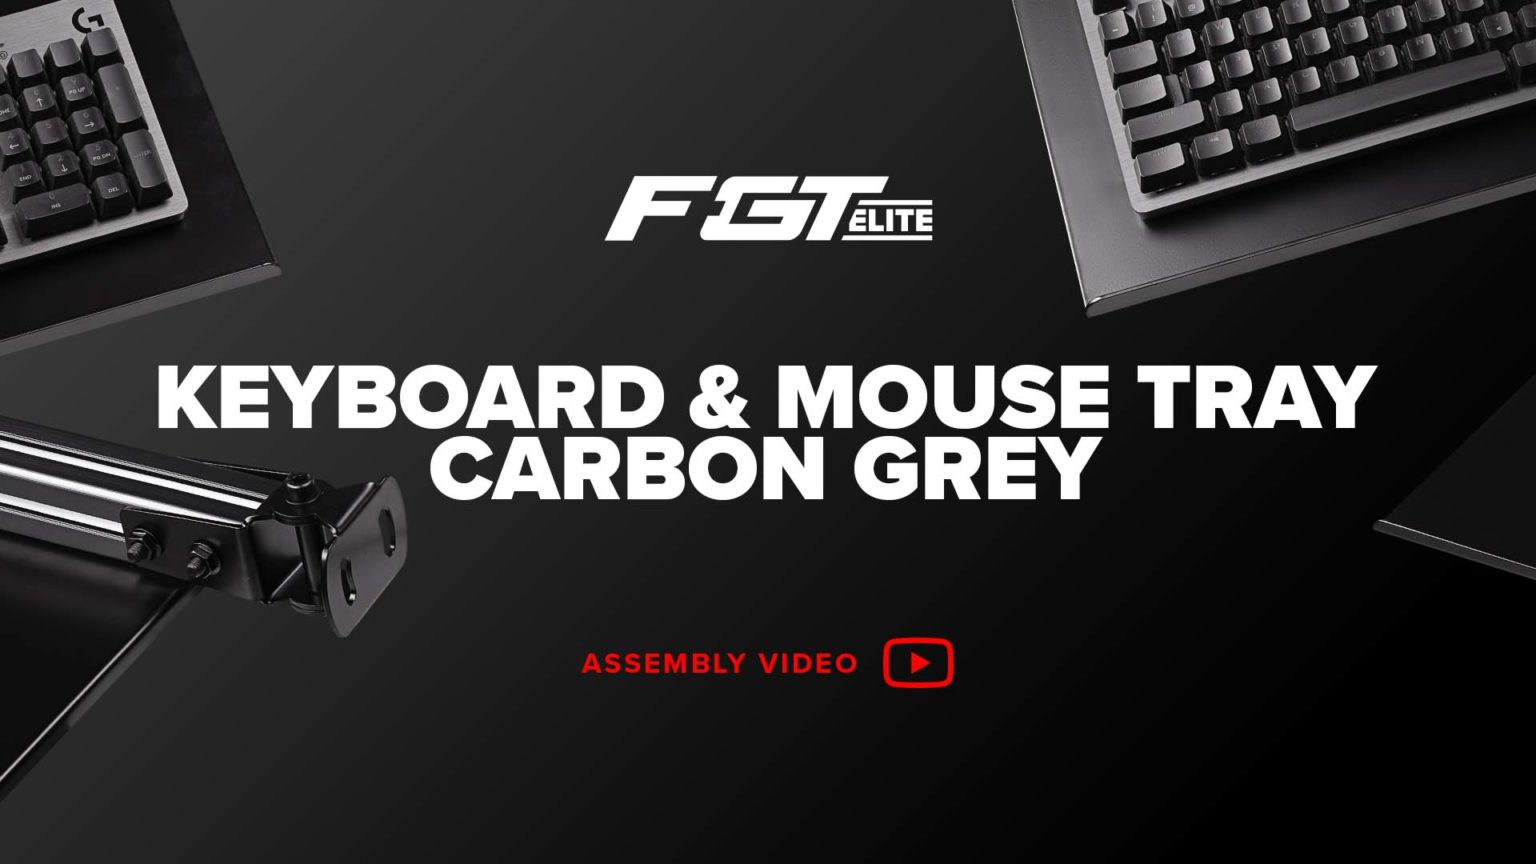 Fgt Elite Keyboard Mouse Trayassembly Video